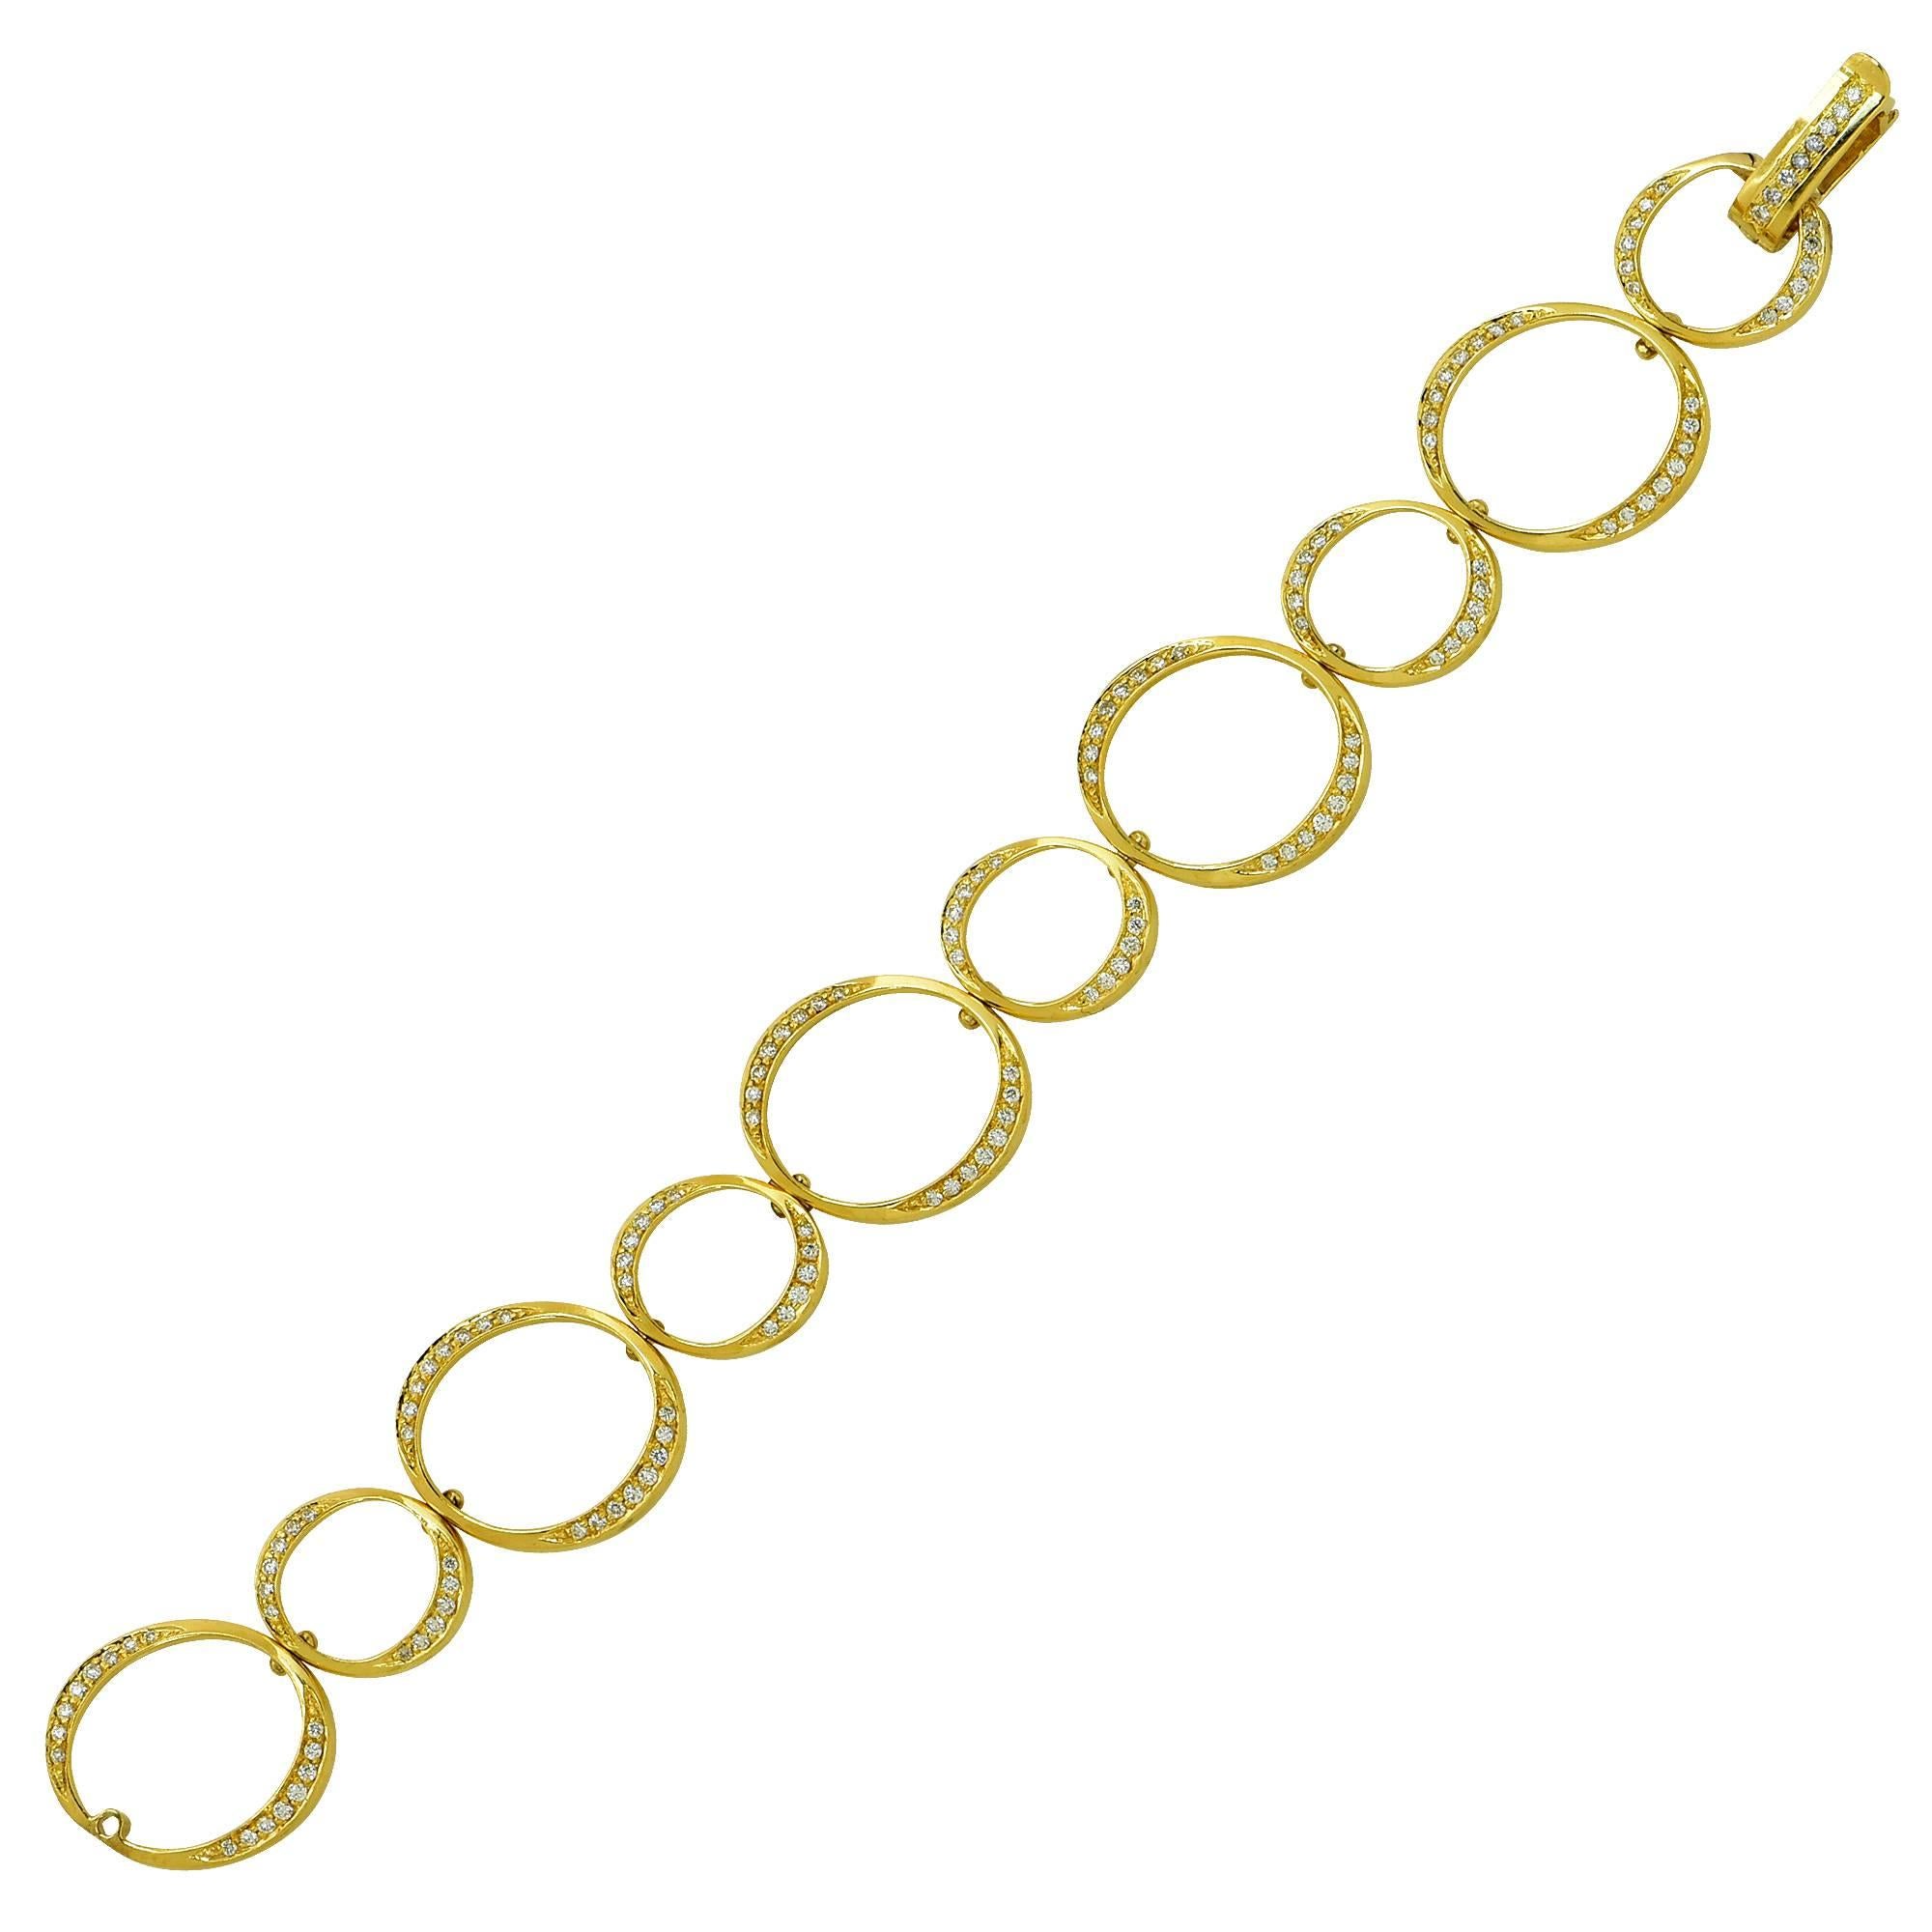 This feminine diamond link bracelet is fashioned in 18 karat yellow gold. The open round links feature 148 round brilliant cut diamonds that weigh approximately 2.03 carat total weight. The bracelet measures 7.5 inches in length and .80 inches in